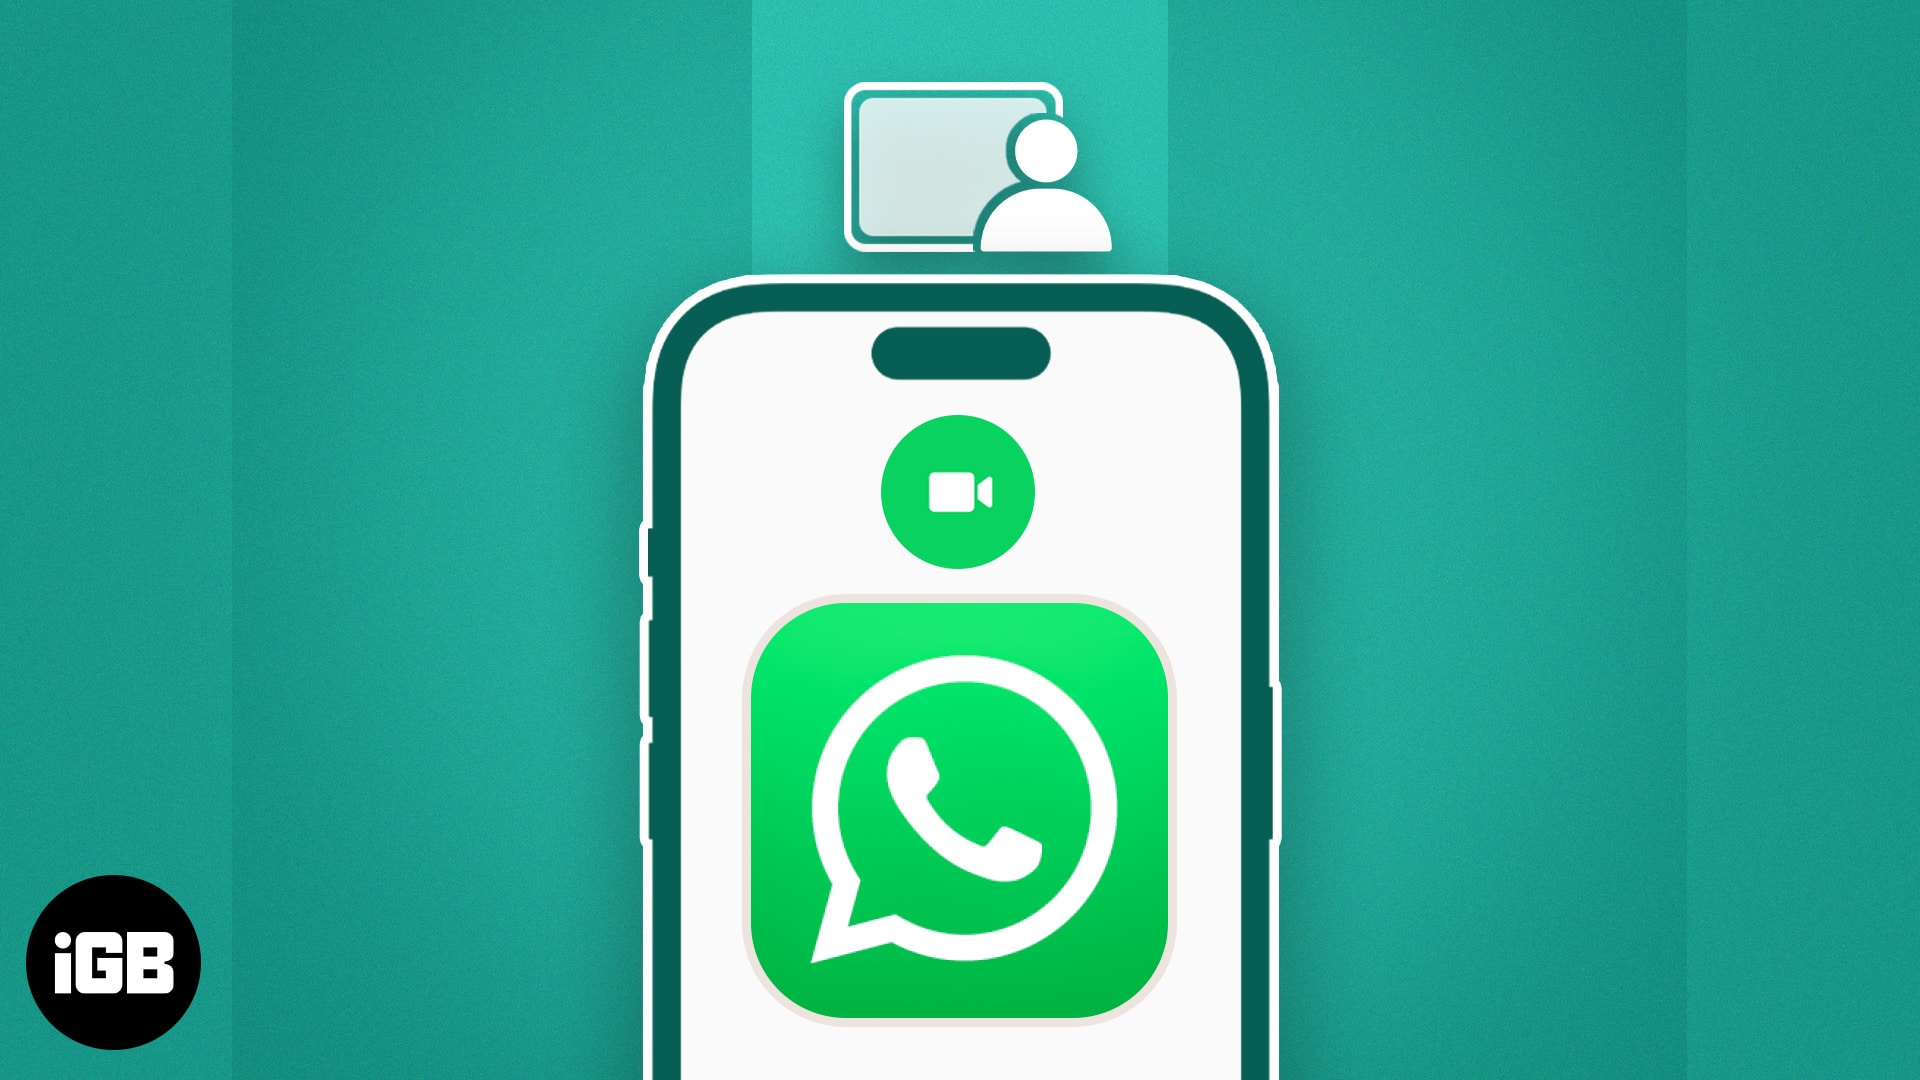 How to share screen in WhatsApp video call on iPhone